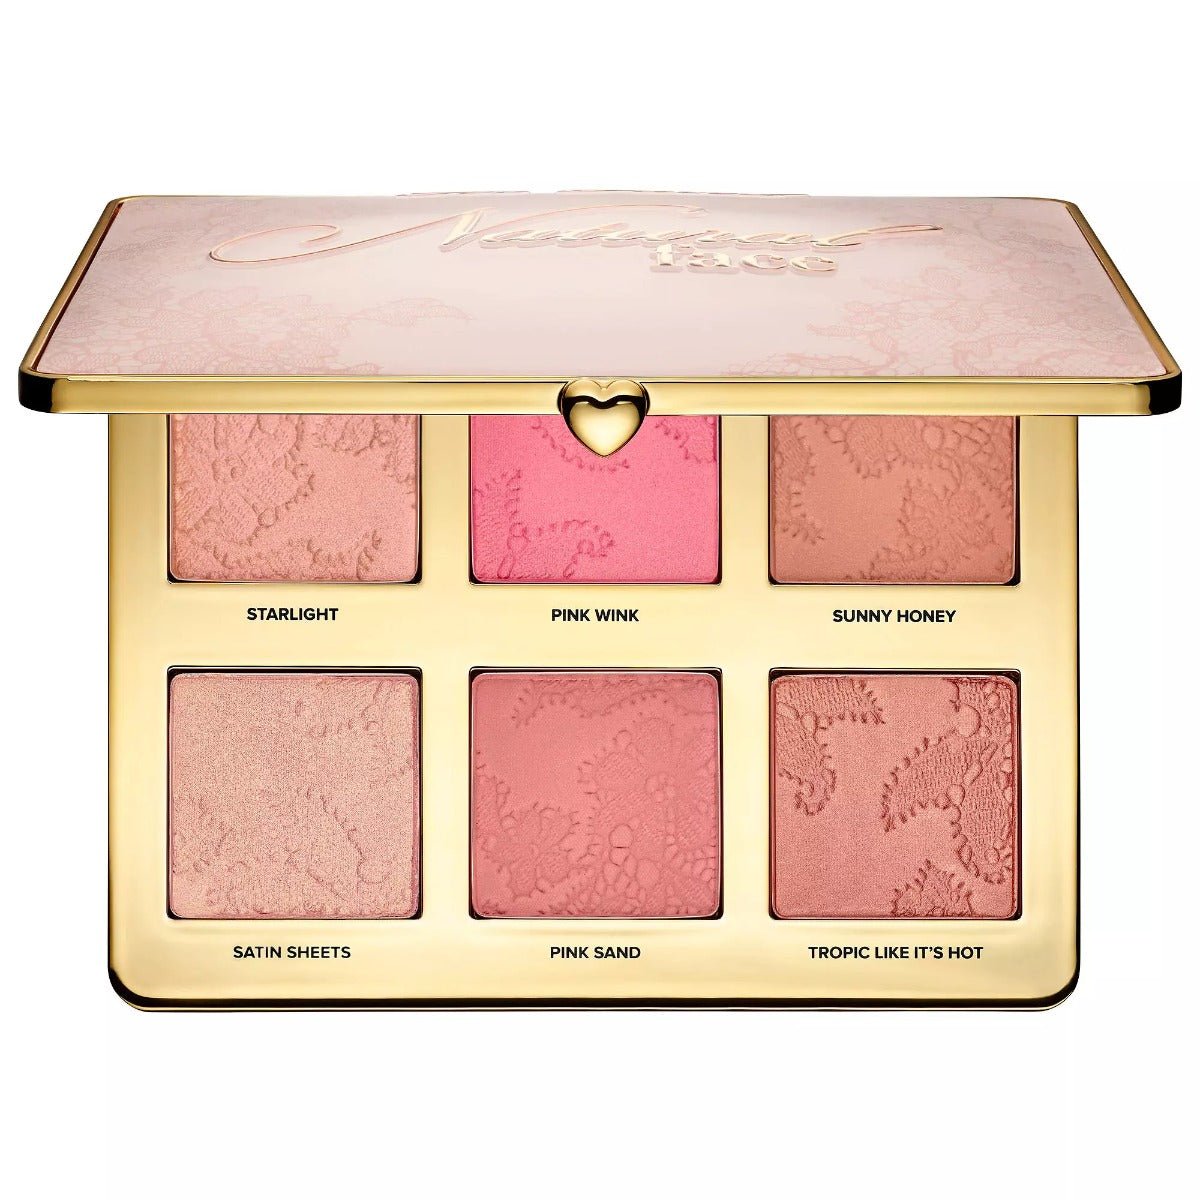 Too Faced Natural Face Highlight Blush and Bronzing Veil Face Palette - AllurebeautypkToo Faced Natural Face Highlight Blush and Bronzing Veil Face Palette